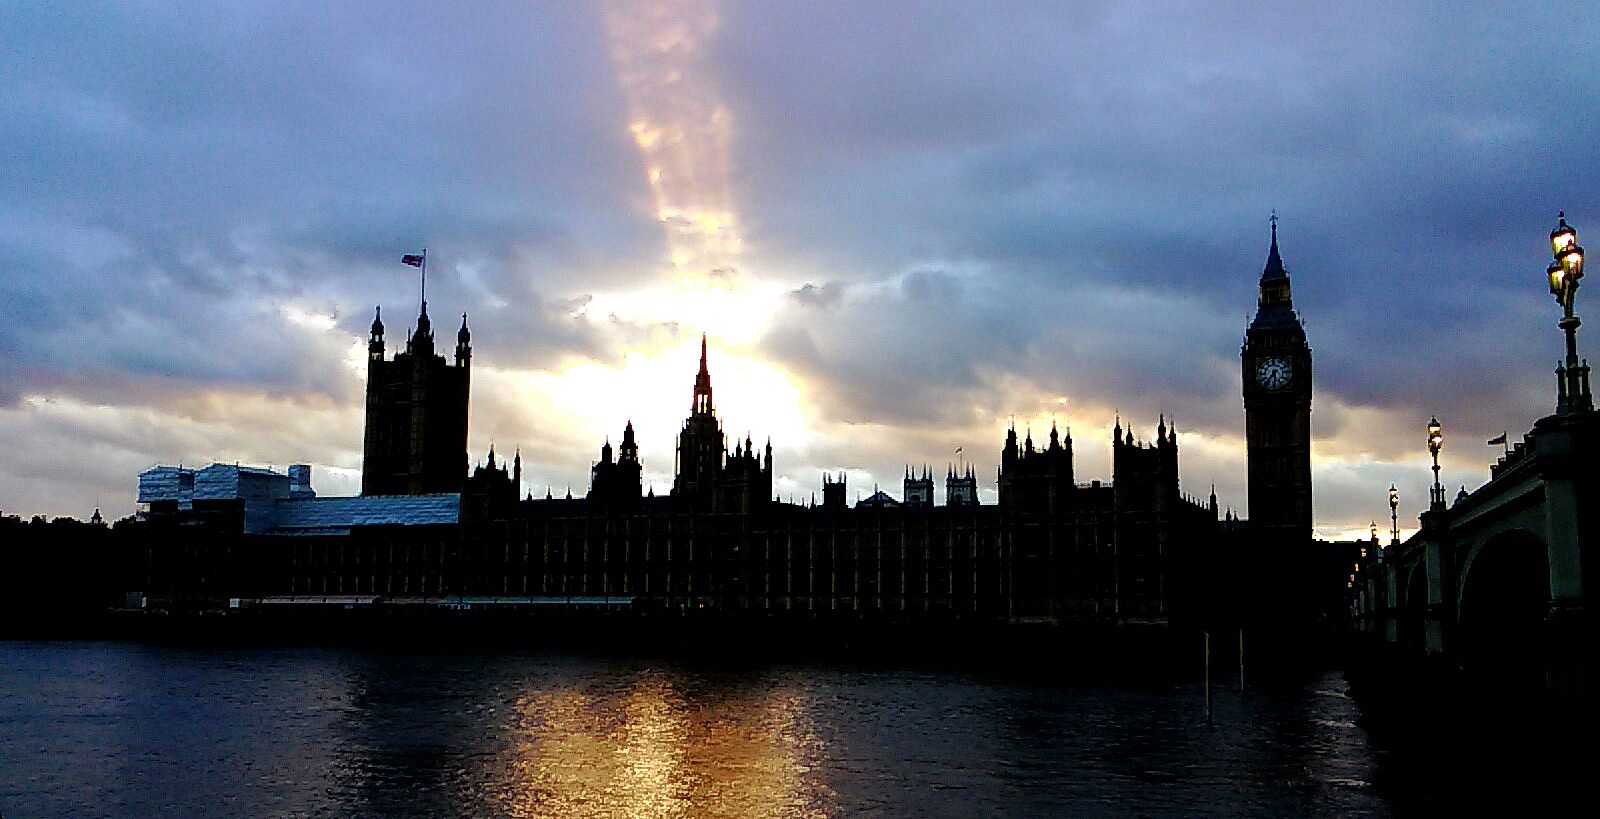 asus zenfone photo challenge winners announced celebrities lose out to big ben image 3